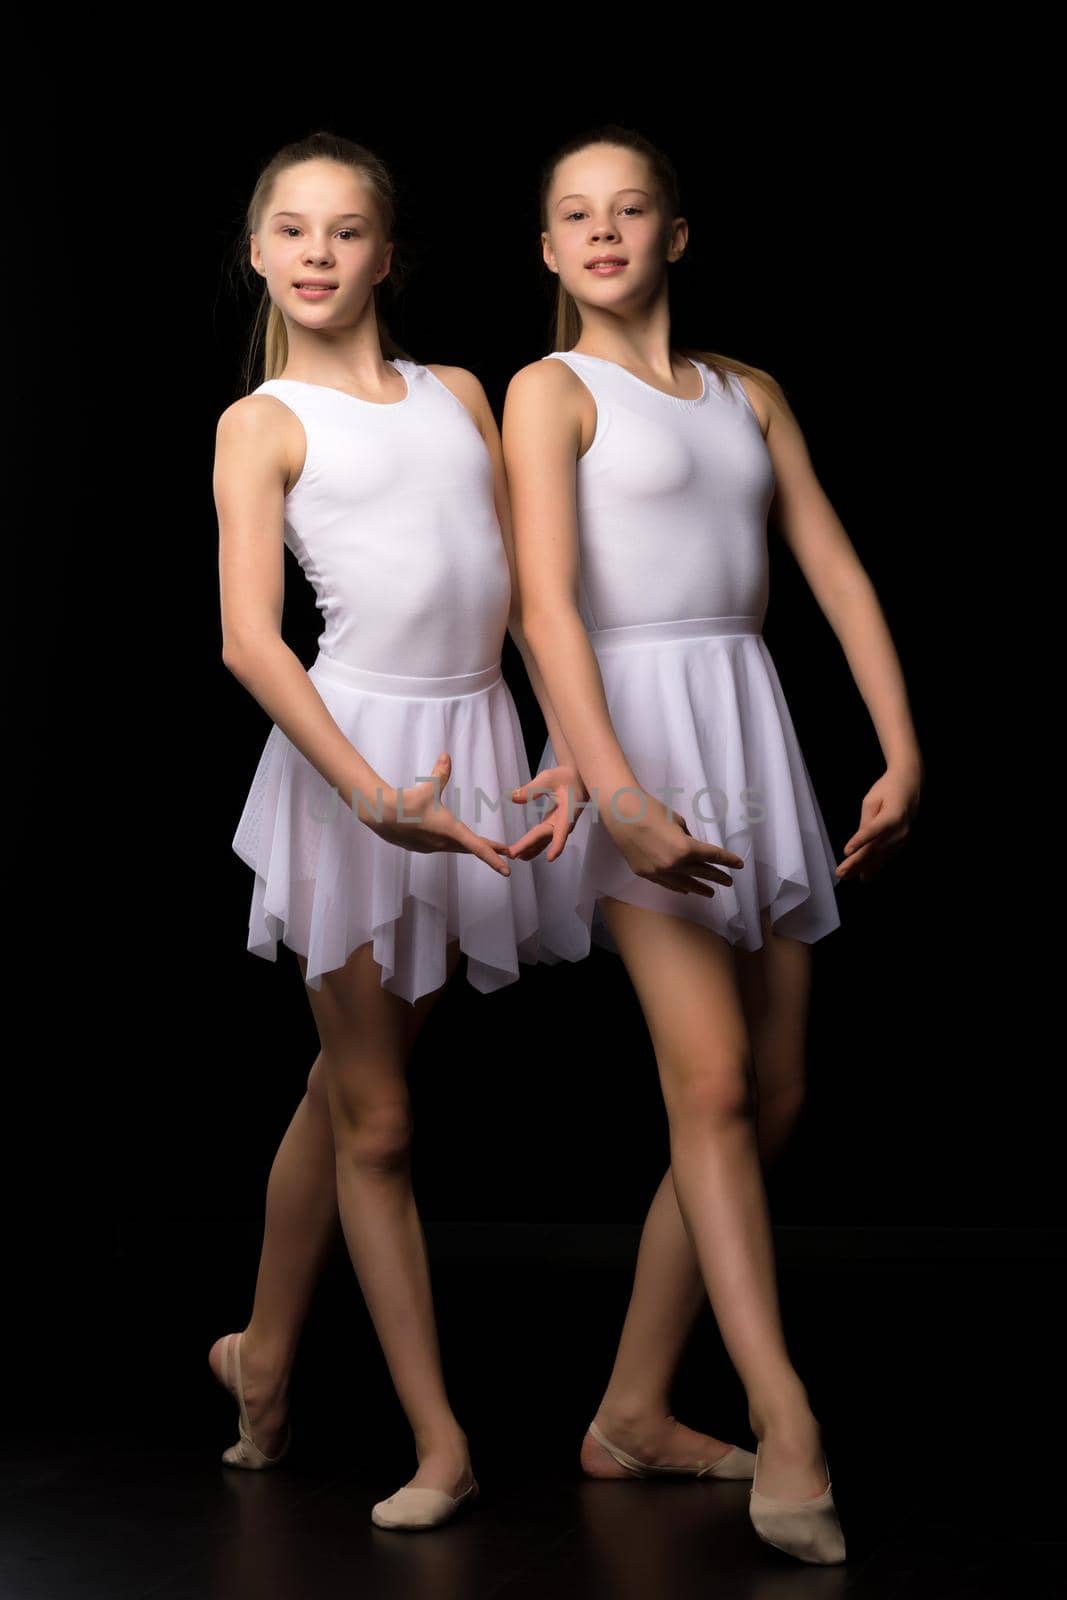 Two cute girls gymnasts in beautiful swimsuits perform exercises on a black background. by kolesnikov_studio